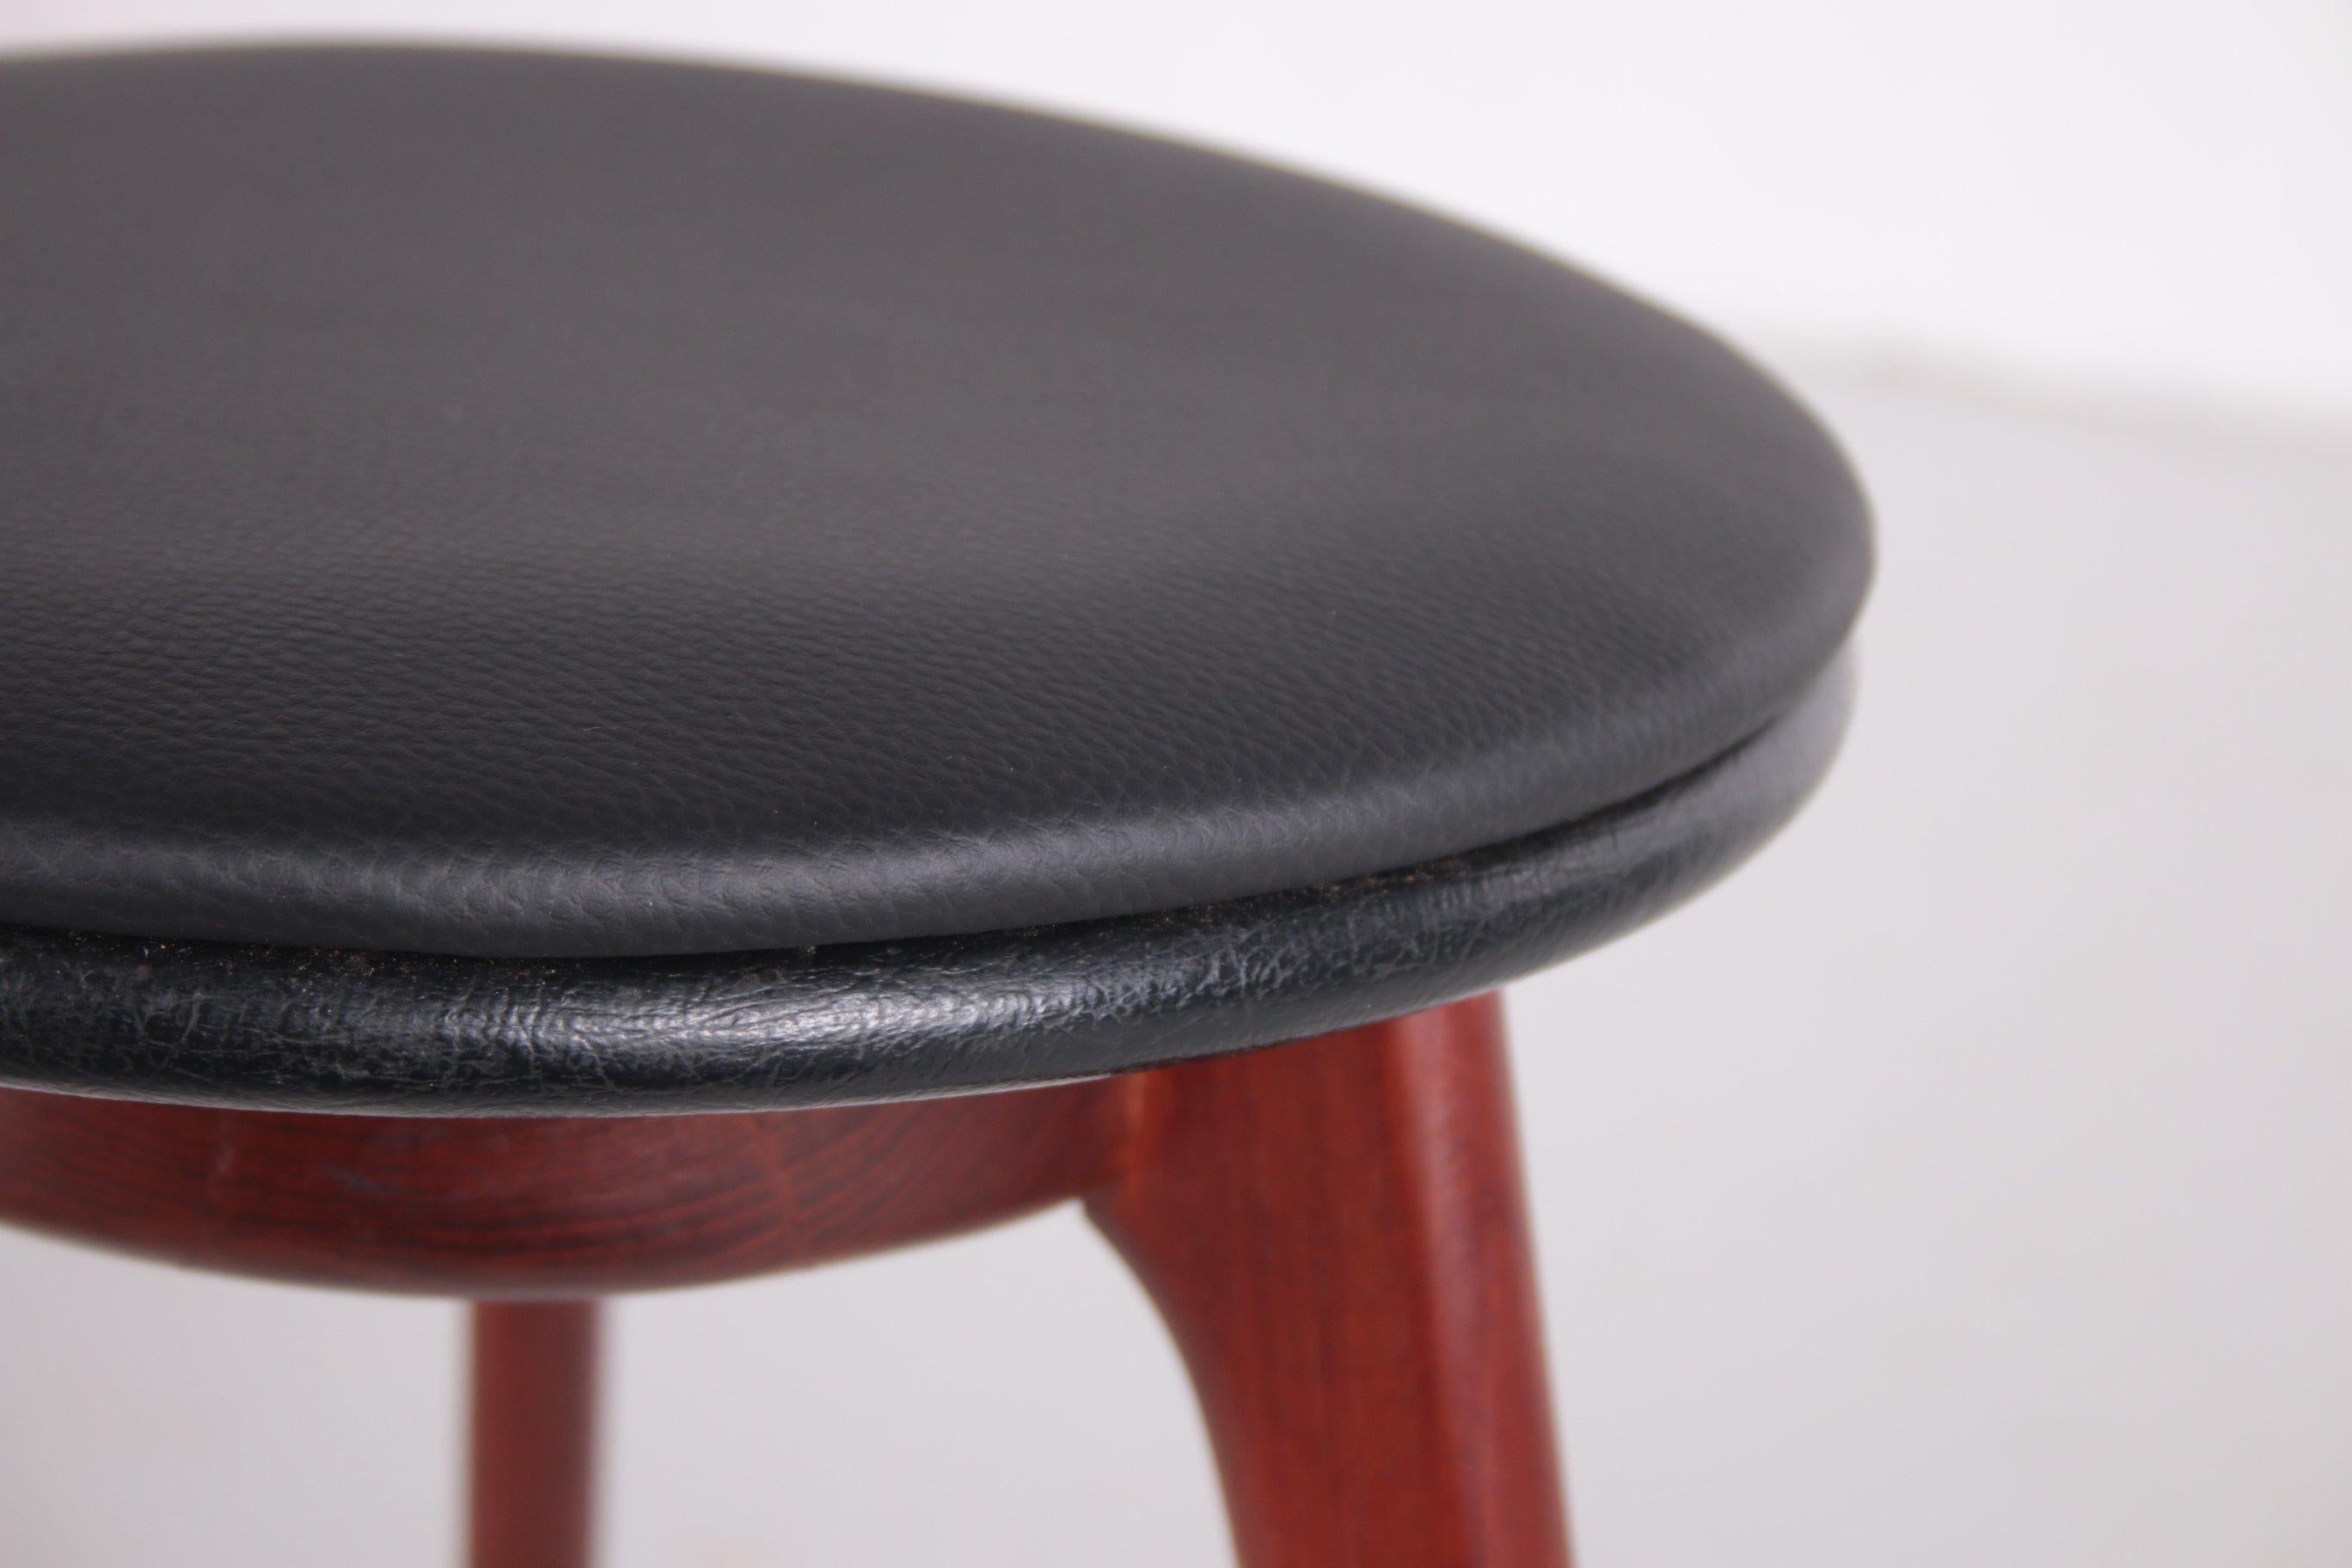 Mid-Century Modern Danish Design Side Stool by Erik Buch Made by Domus Danica, 1960s For Sale